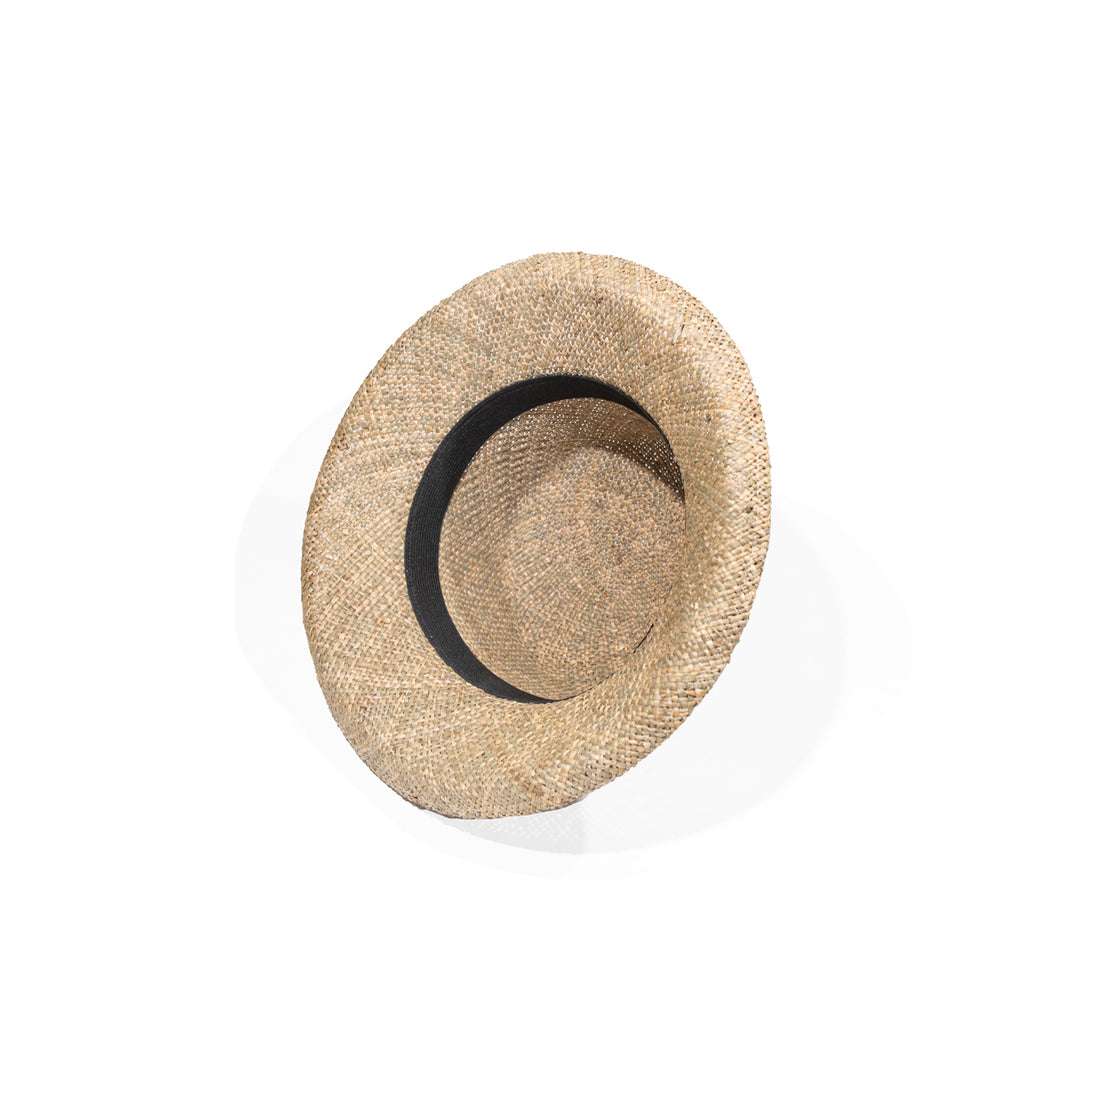 Clyde Doze Hat in Seagrass